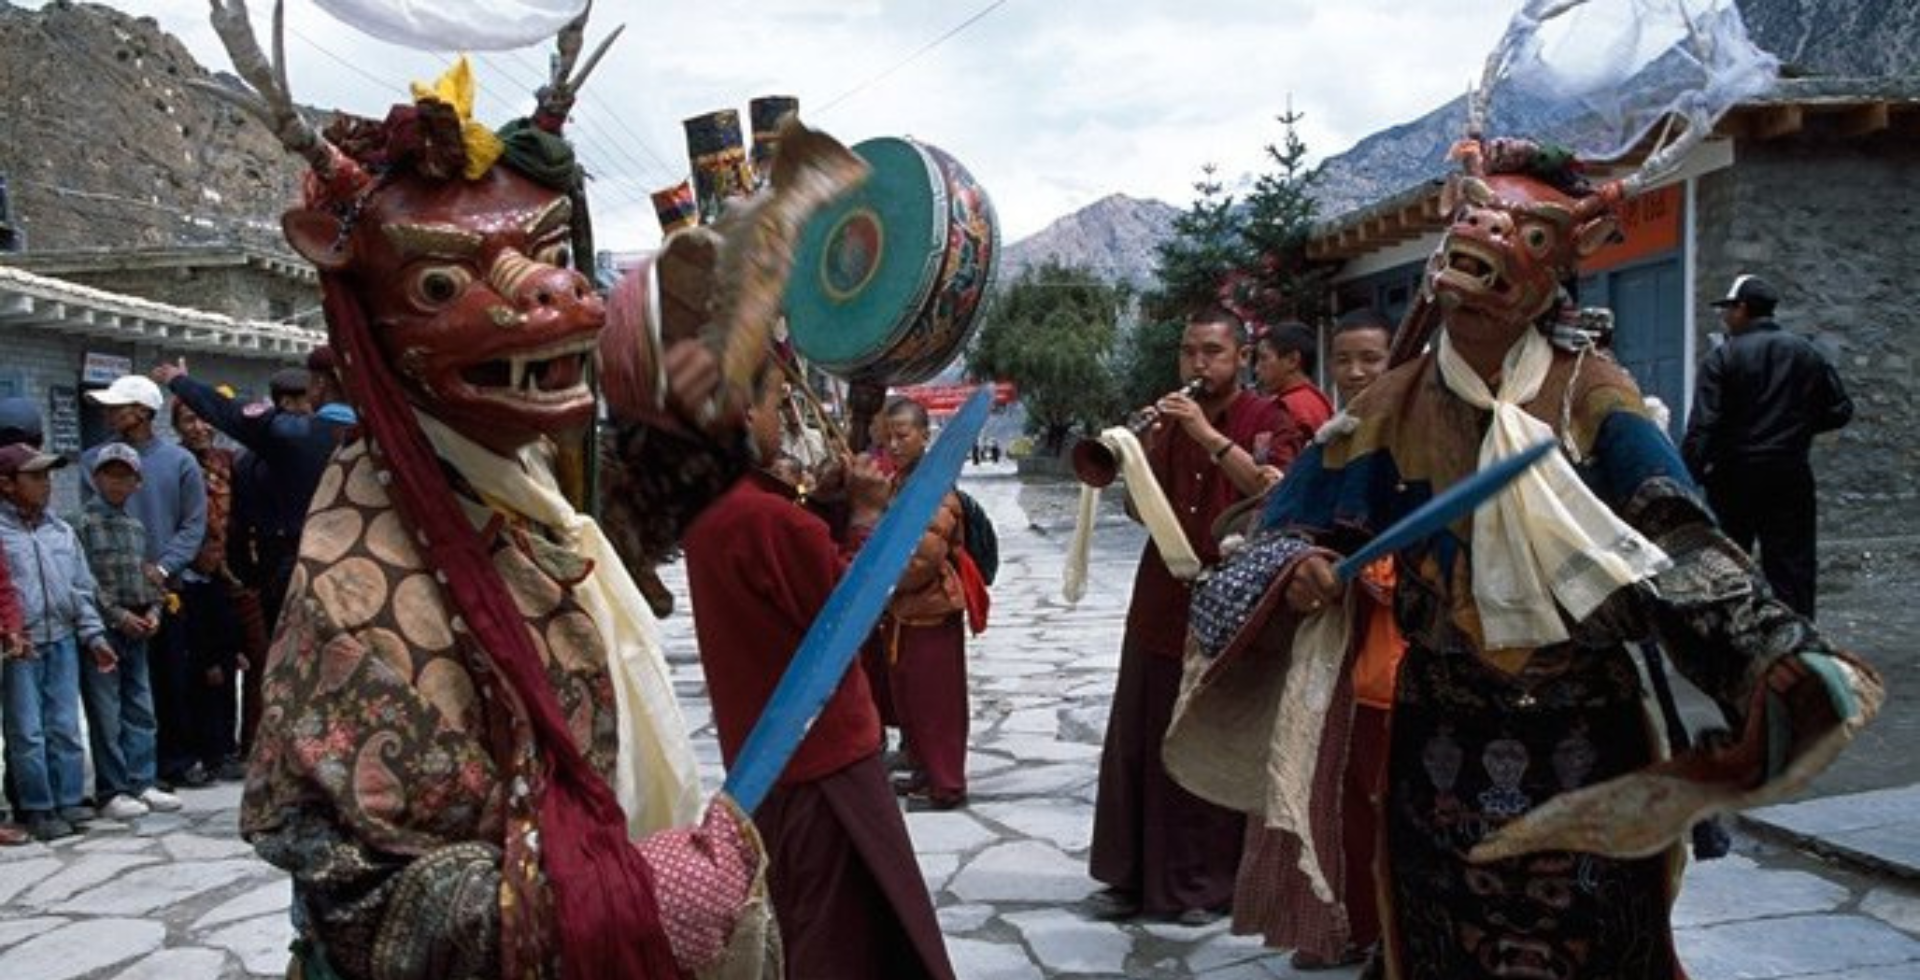 Popular festivals in the himalayan region of Nepal